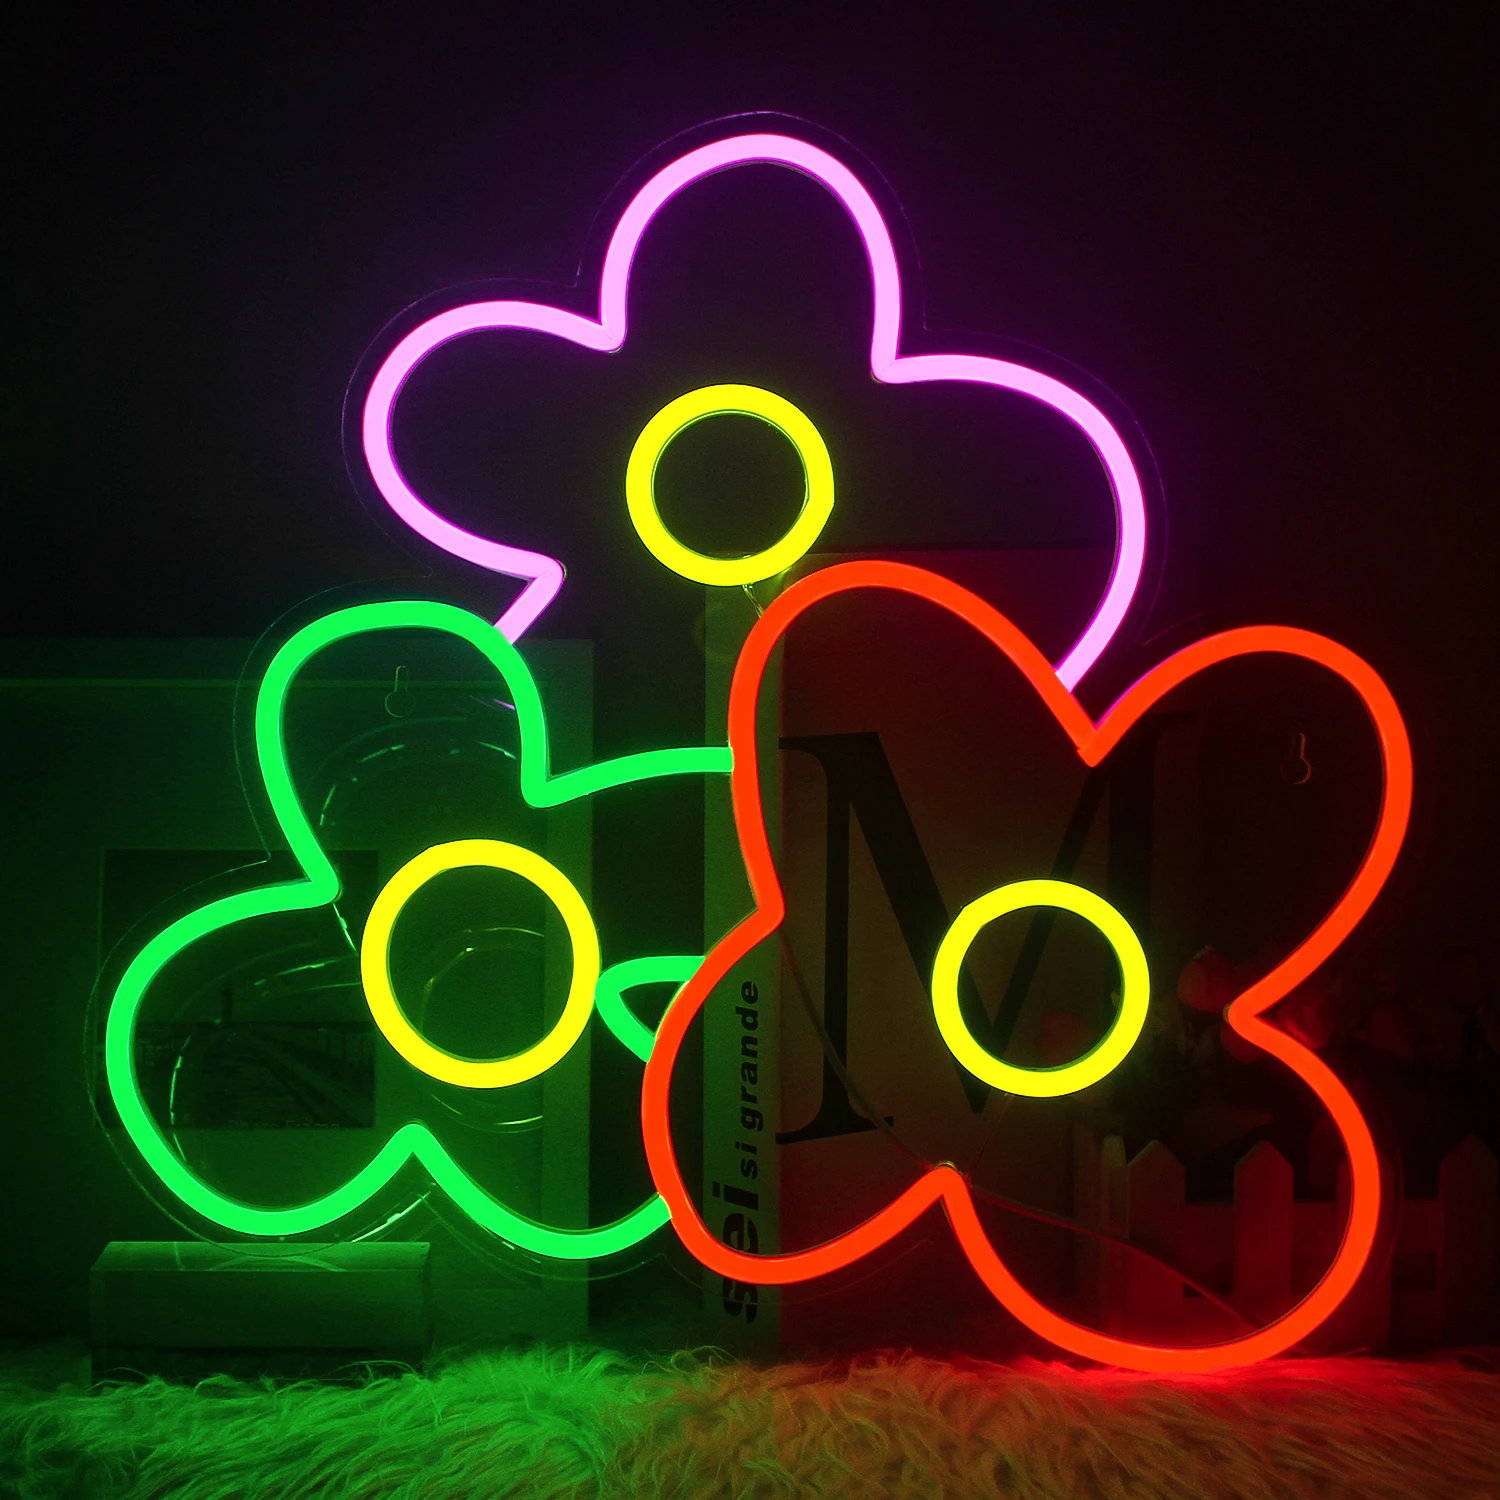 

Flowers Neon Sign Custom Multicolor Lamps For Home Room Wall Party Wedding Shop Wall Decor Customize Your Favorite LED Lights